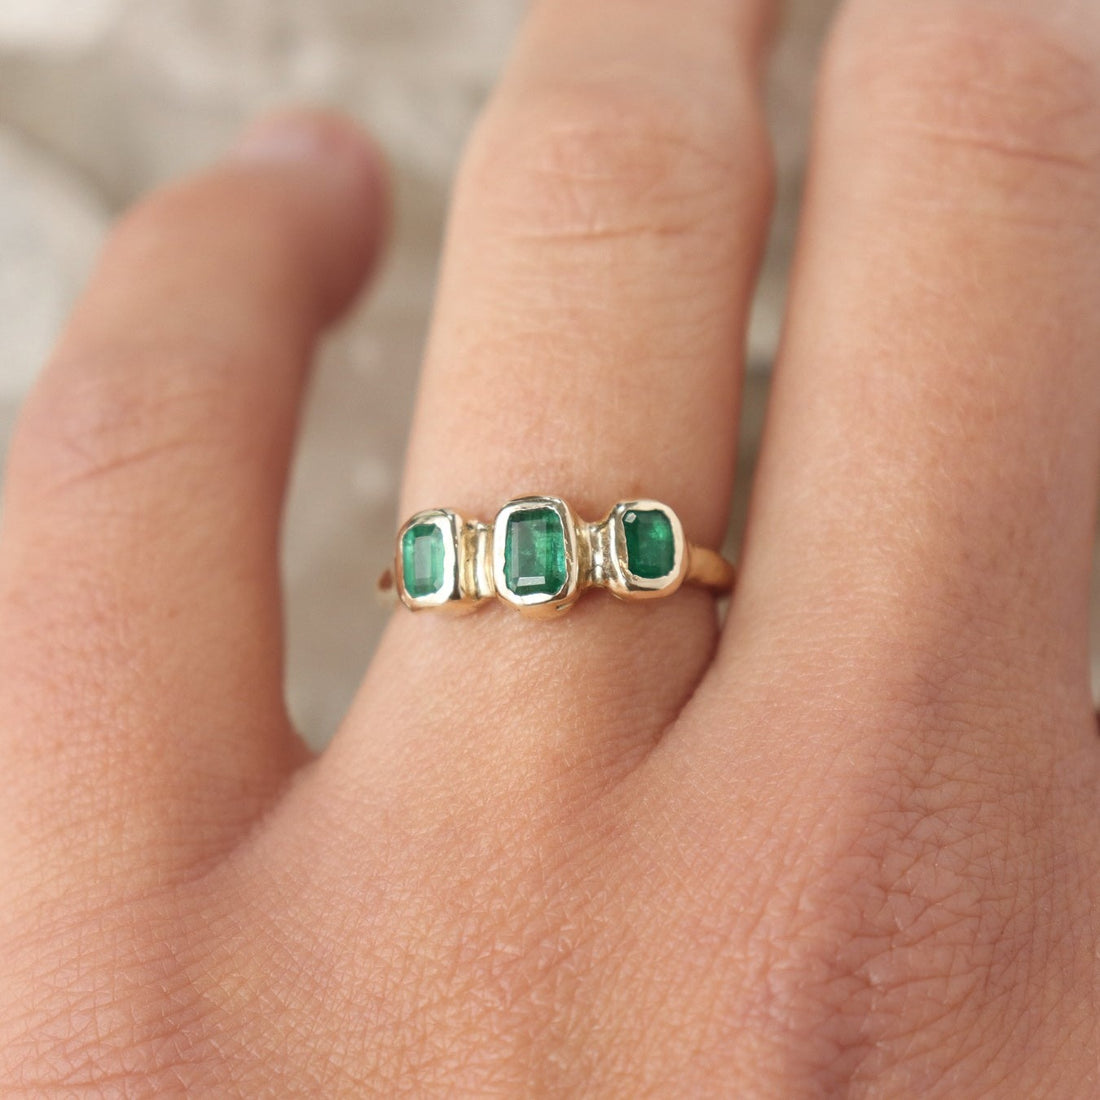 Three small emerald cut emeralds are embedded into a 14k gold ring giving it an organic  and handcrafted look.